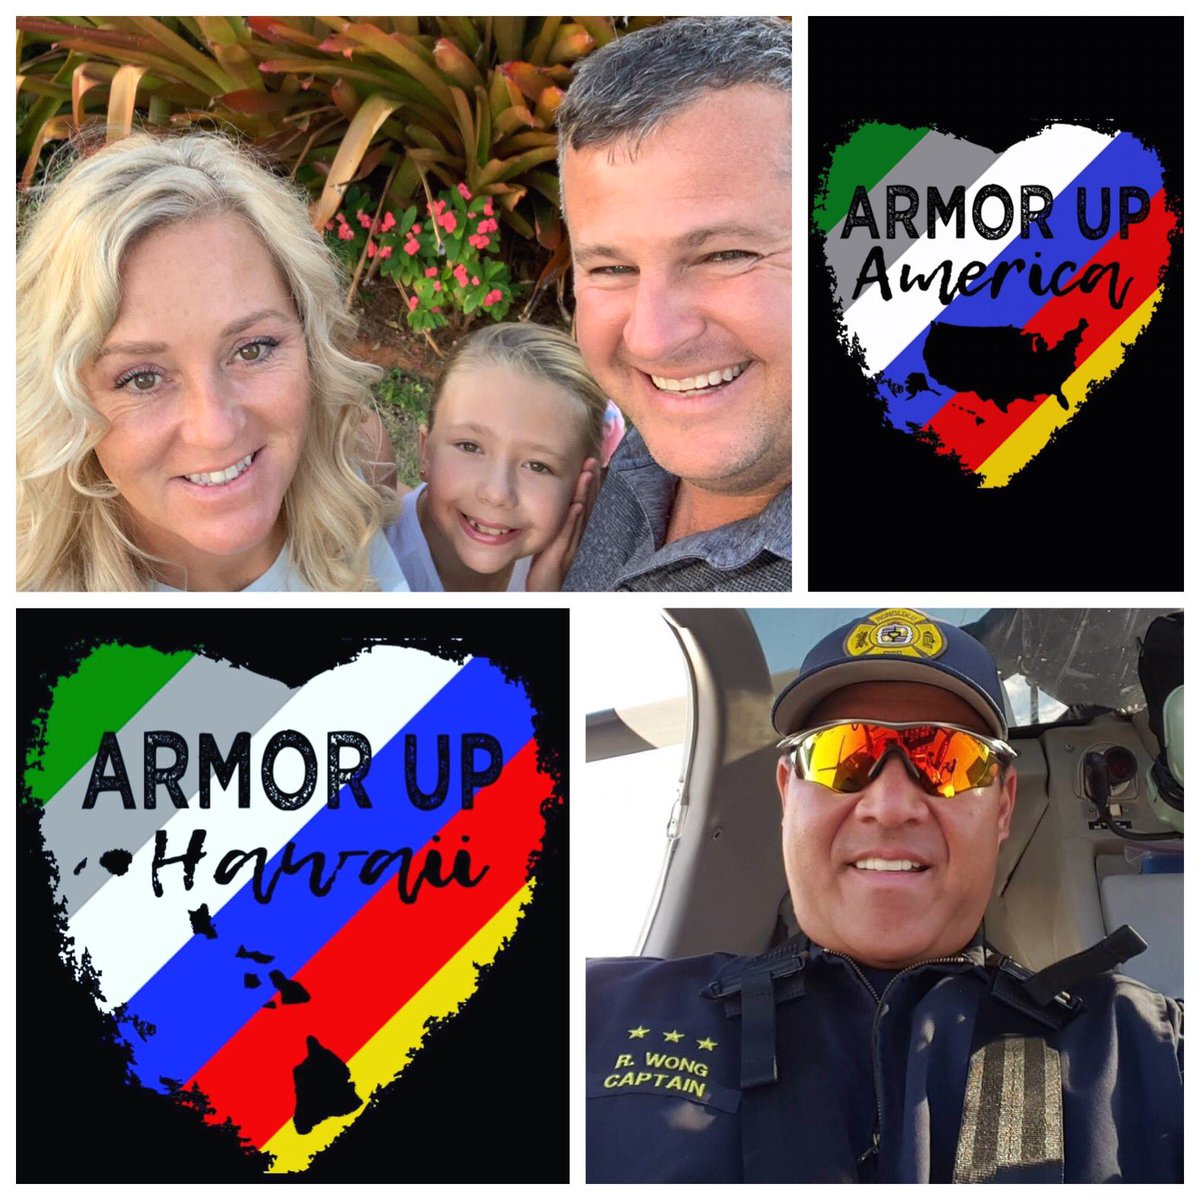 We’re so #honored to announce the official launch of #ArmorUpHawaii lead by Michele Mowry, Geoff Mowry, #Bella and Russell Wong.  These dedicated individuals are committed to bringing the best care, prevention & training to the families and first responders of #Hawaii.  #Aloha